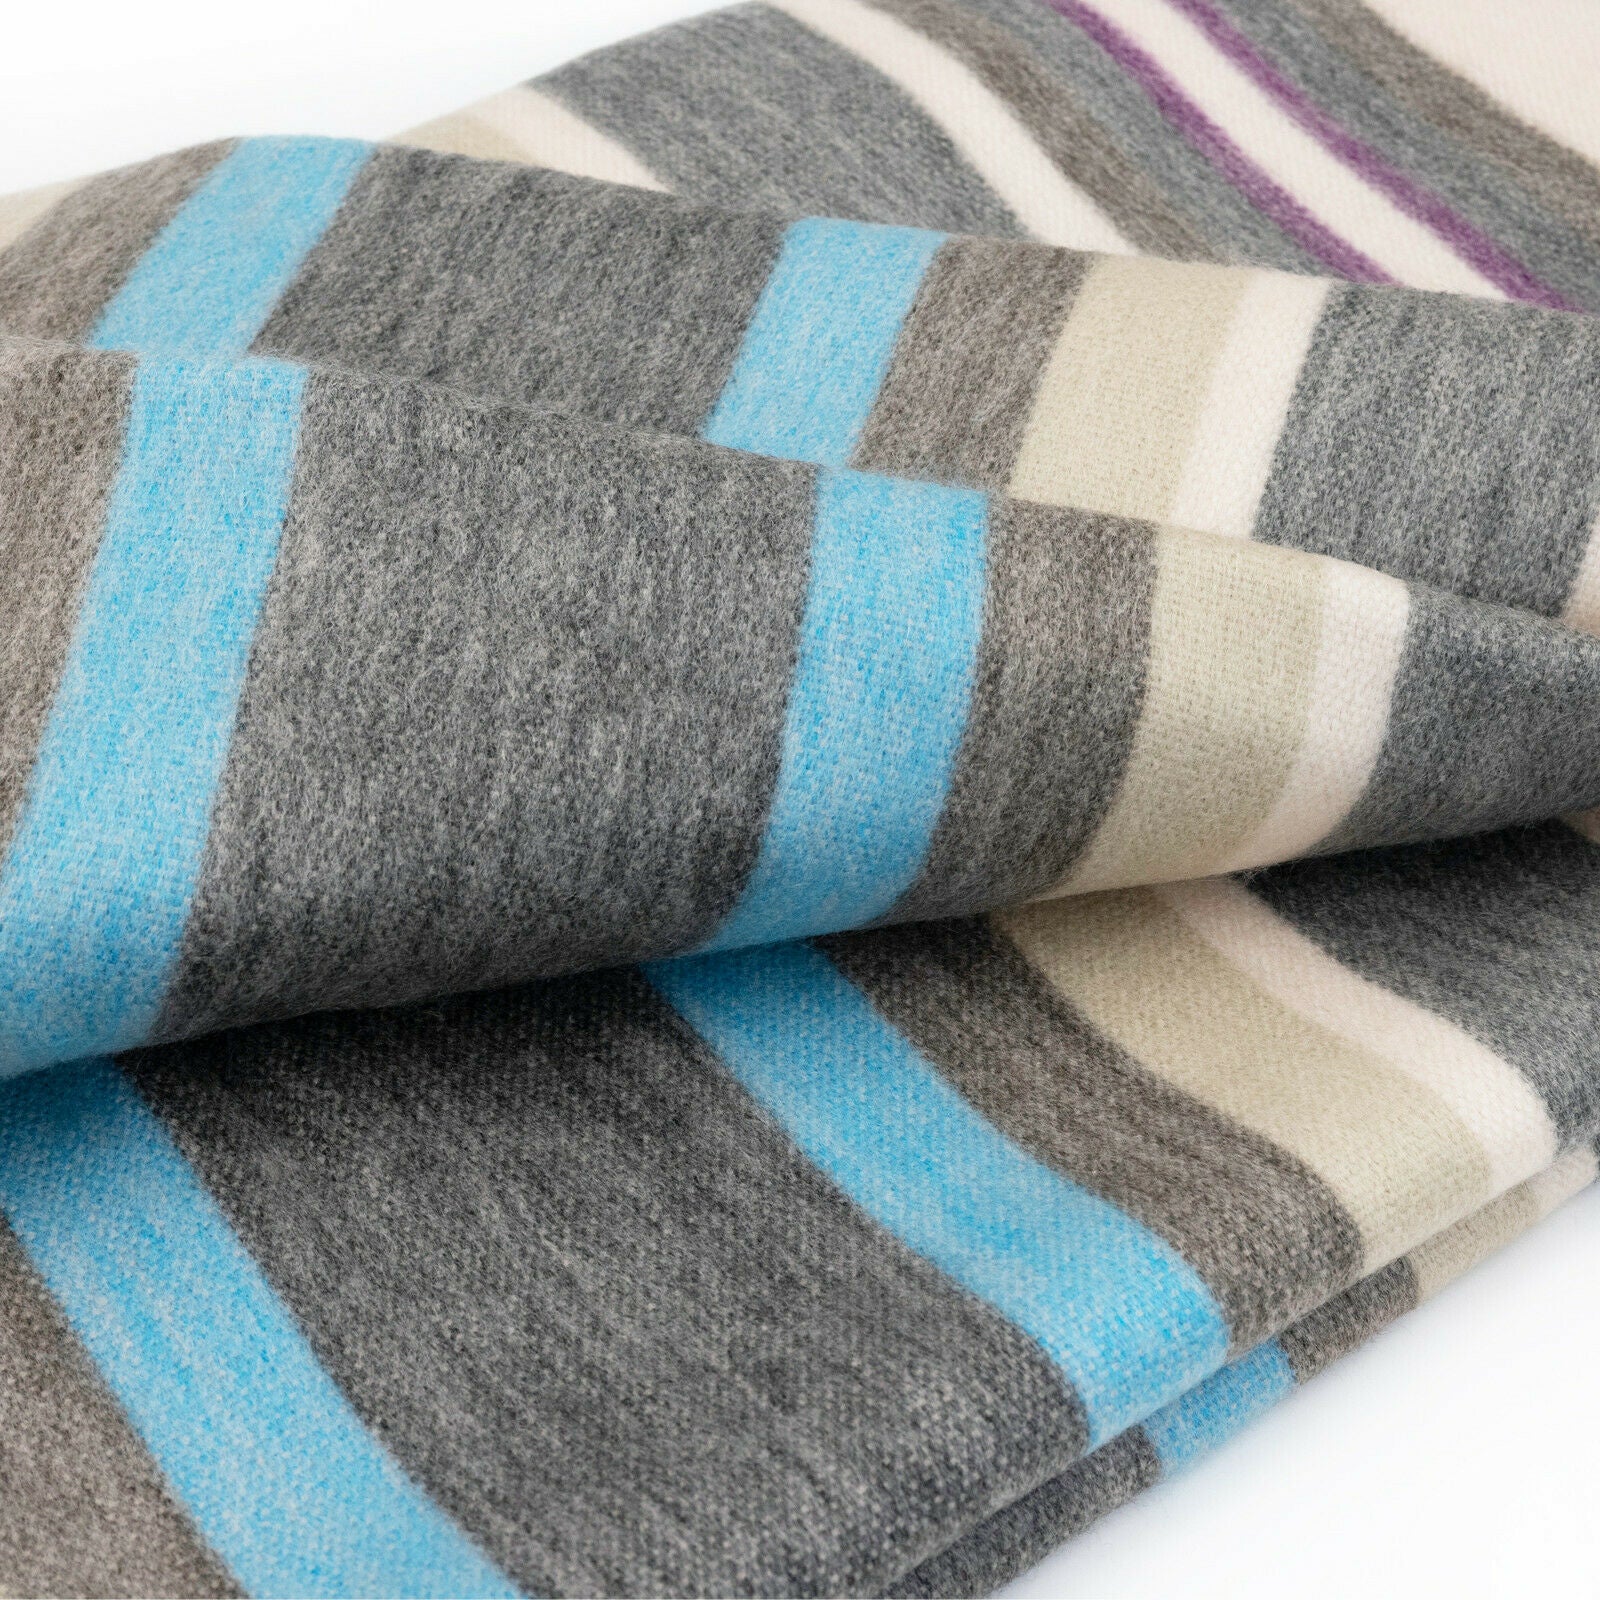 Ujucan - Baby Alpaca Wool Throw Blanket / Sofa Cover - Queen 95" x 66" - turquoise gray stripes pattern